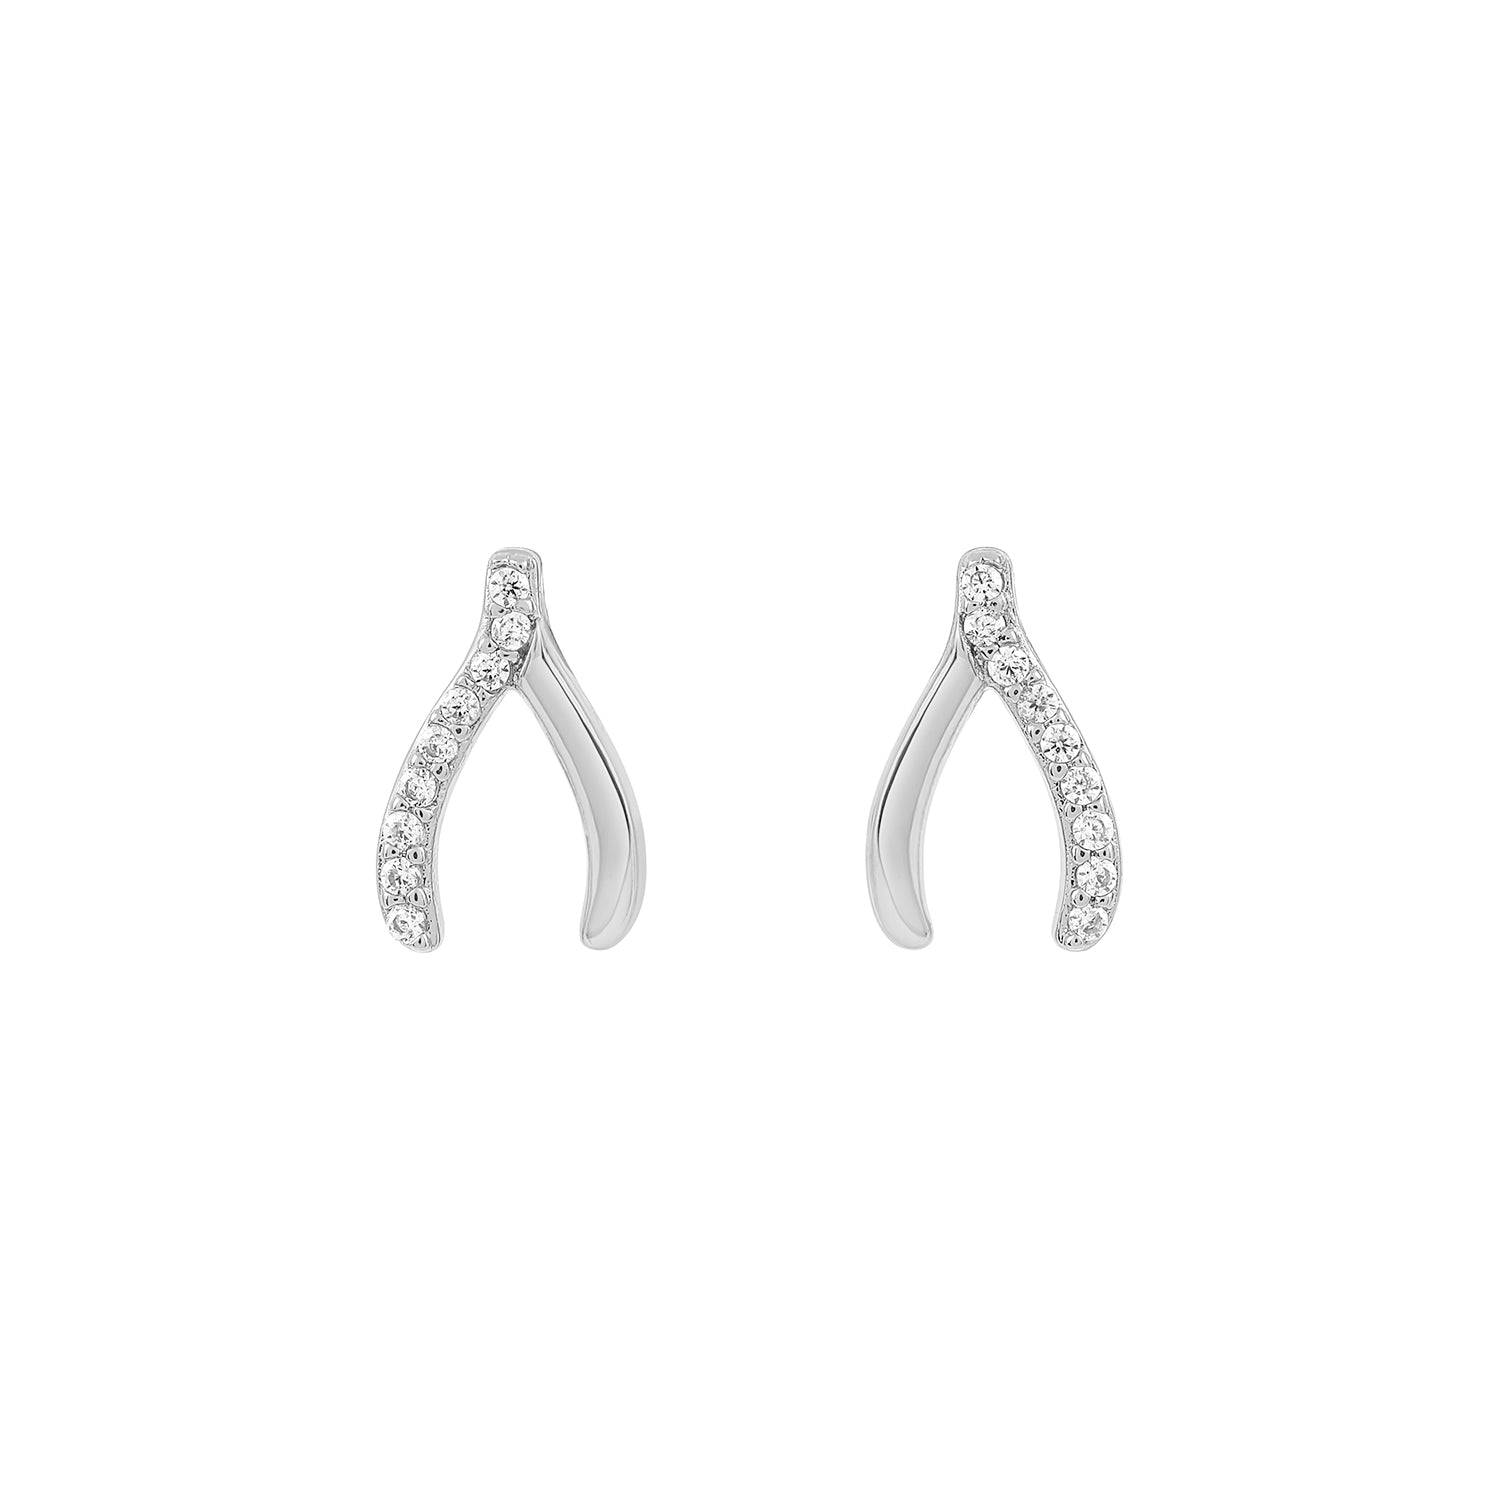 Elegant and statement earrings. 925 silver wishbone studs set with cubic zirconia stones.